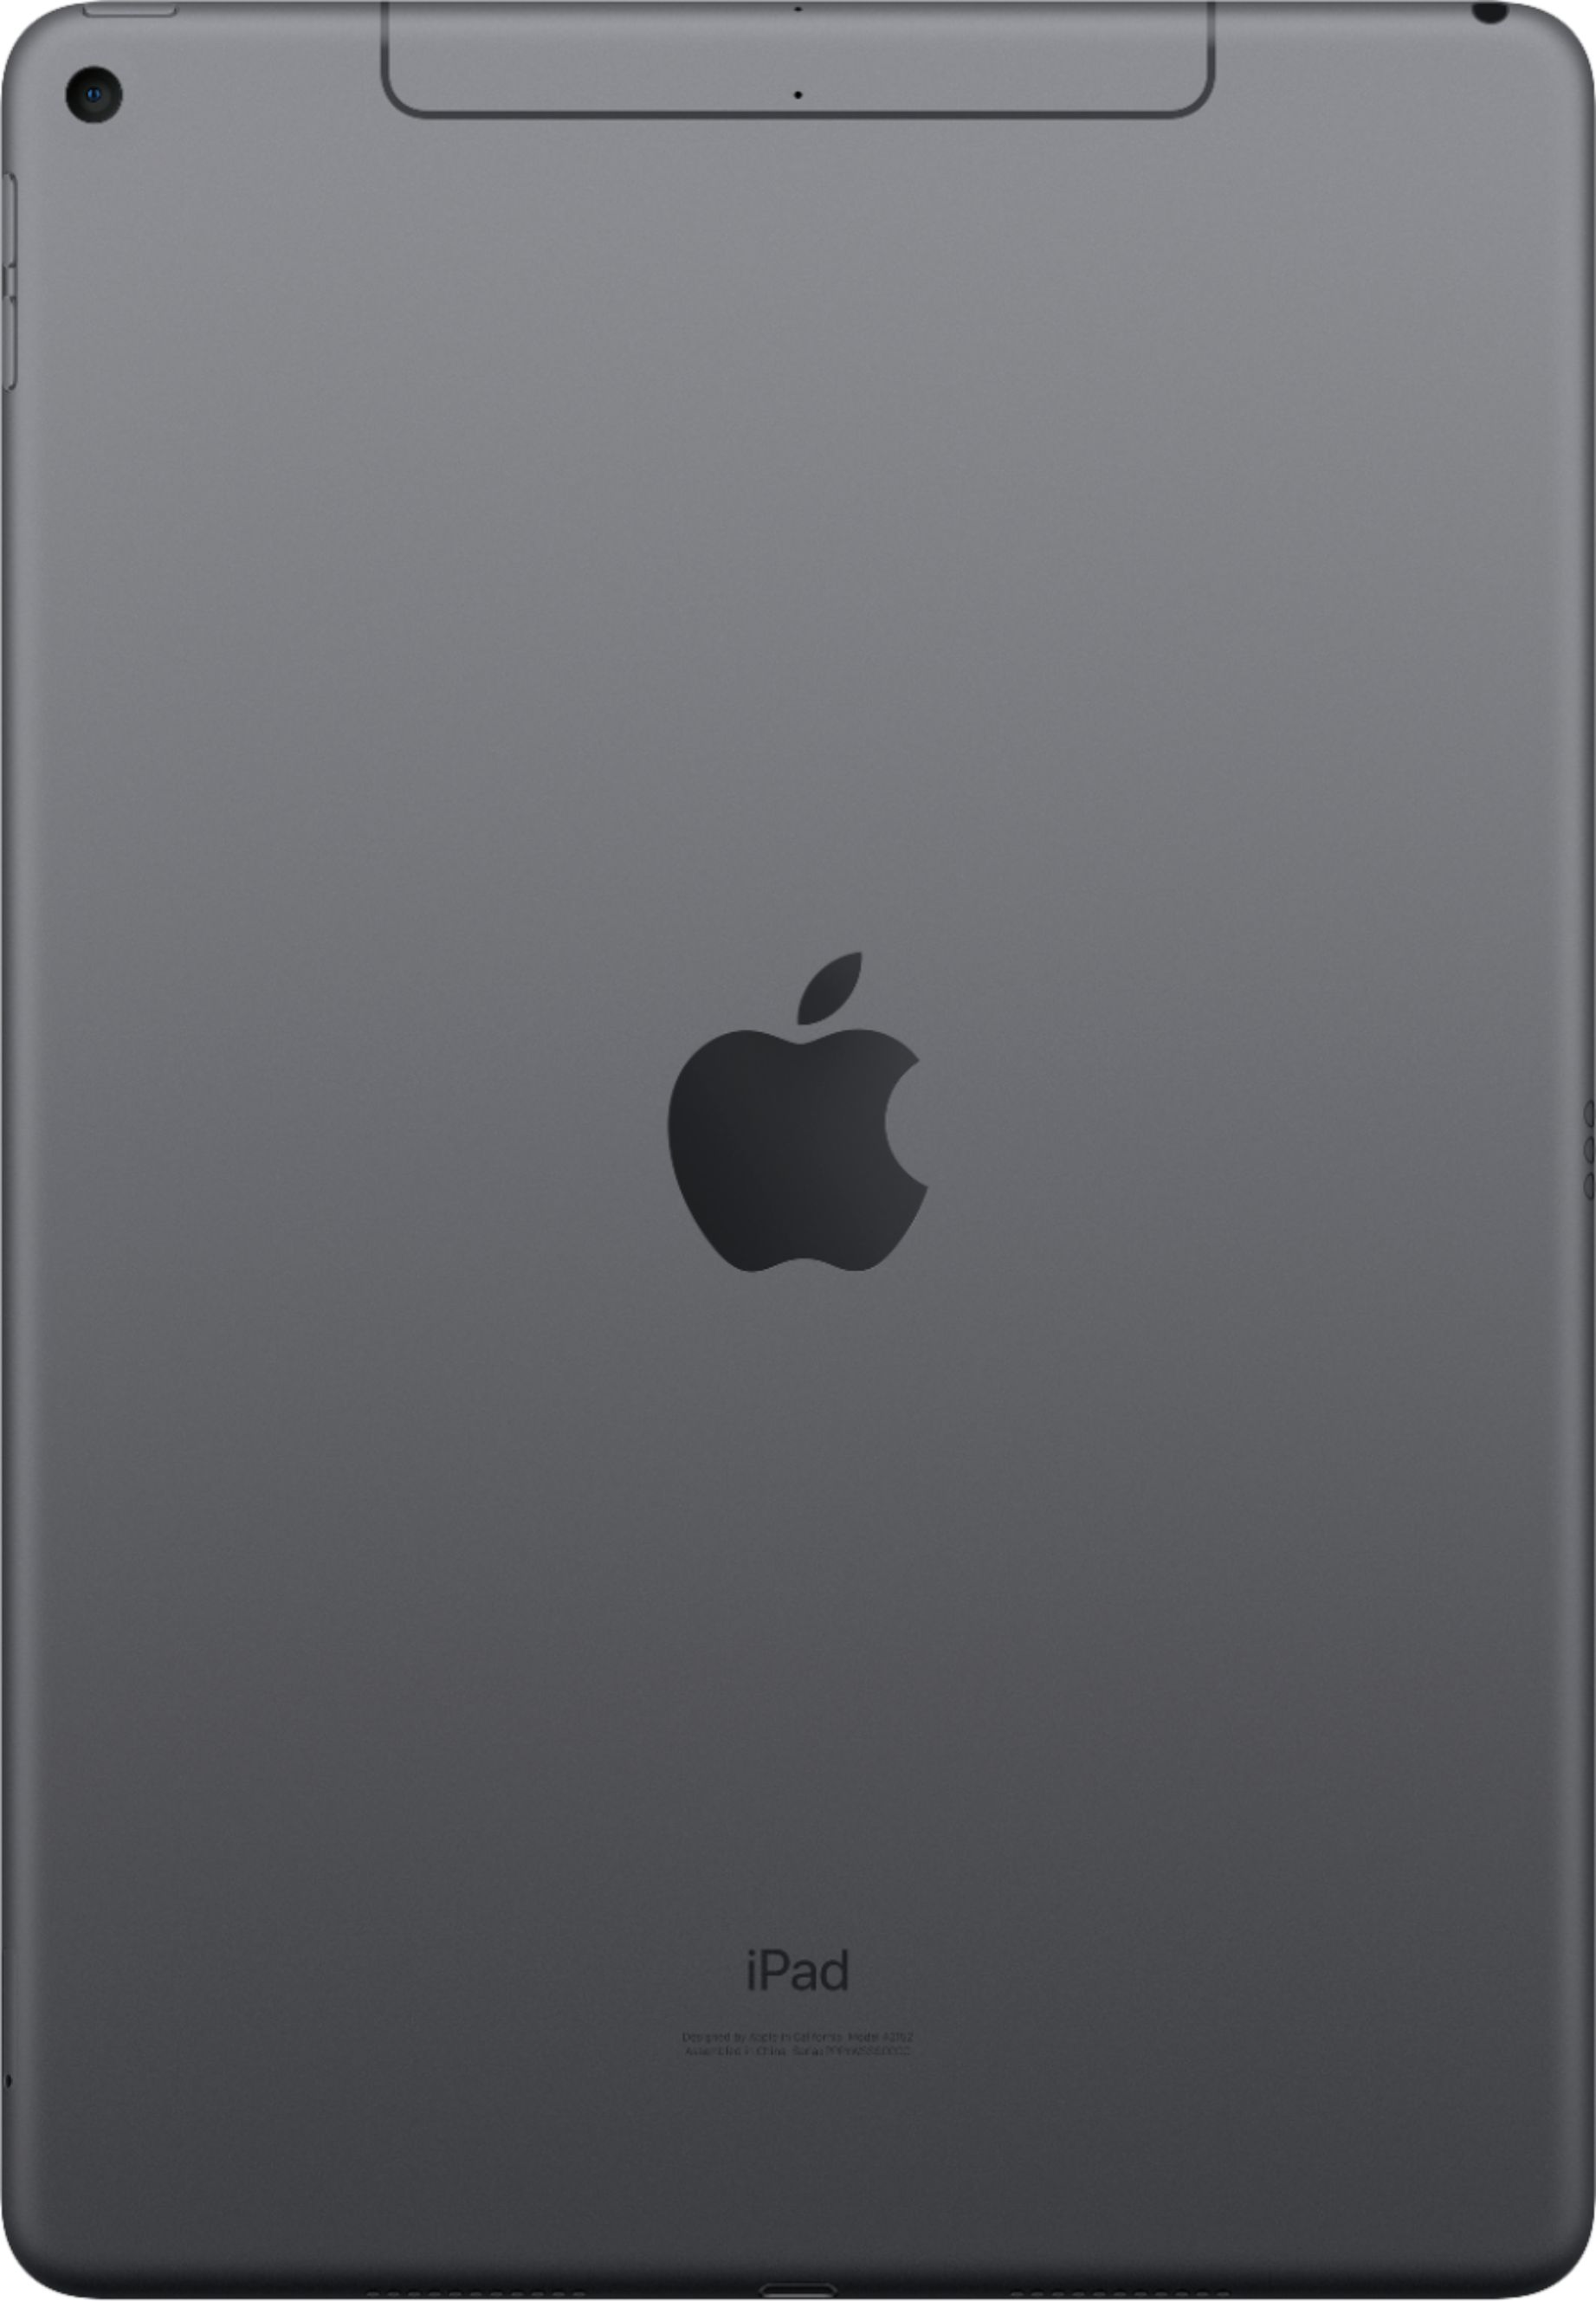 Questions and Answers: Apple iPad Air with Wi-Fi + Cellular 256GB ...